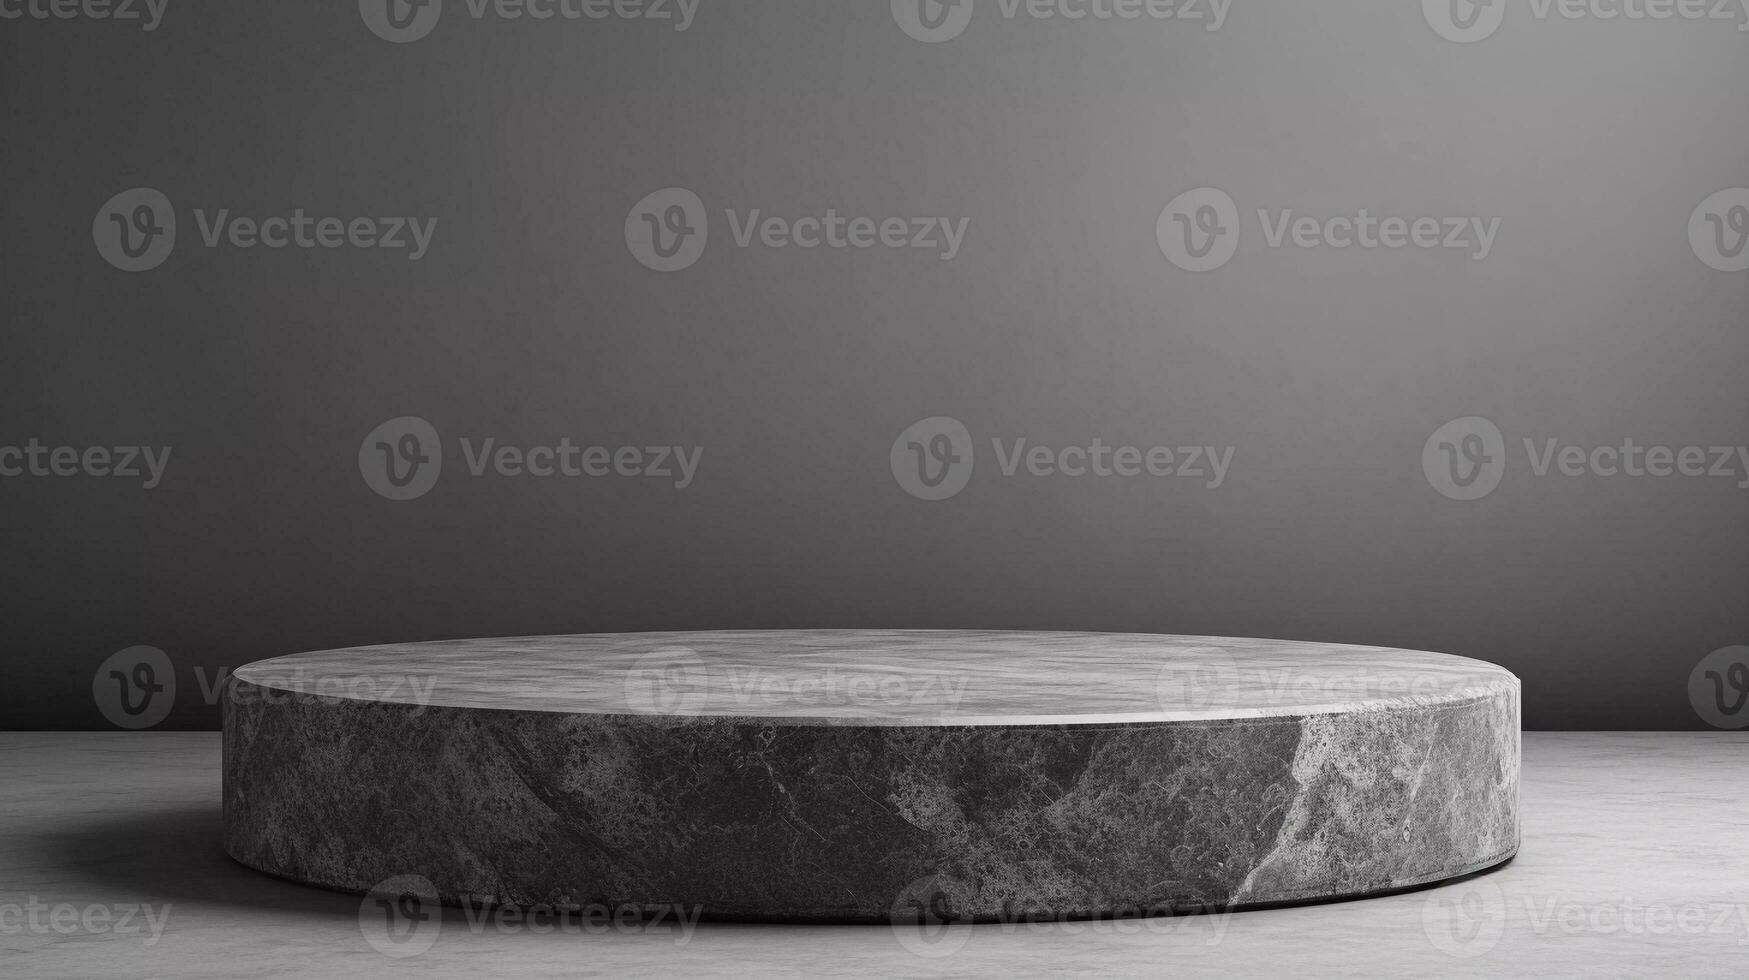 Flat round granite pedestal with small black stones around the granite on textured background and water flowing under the granite stone photo